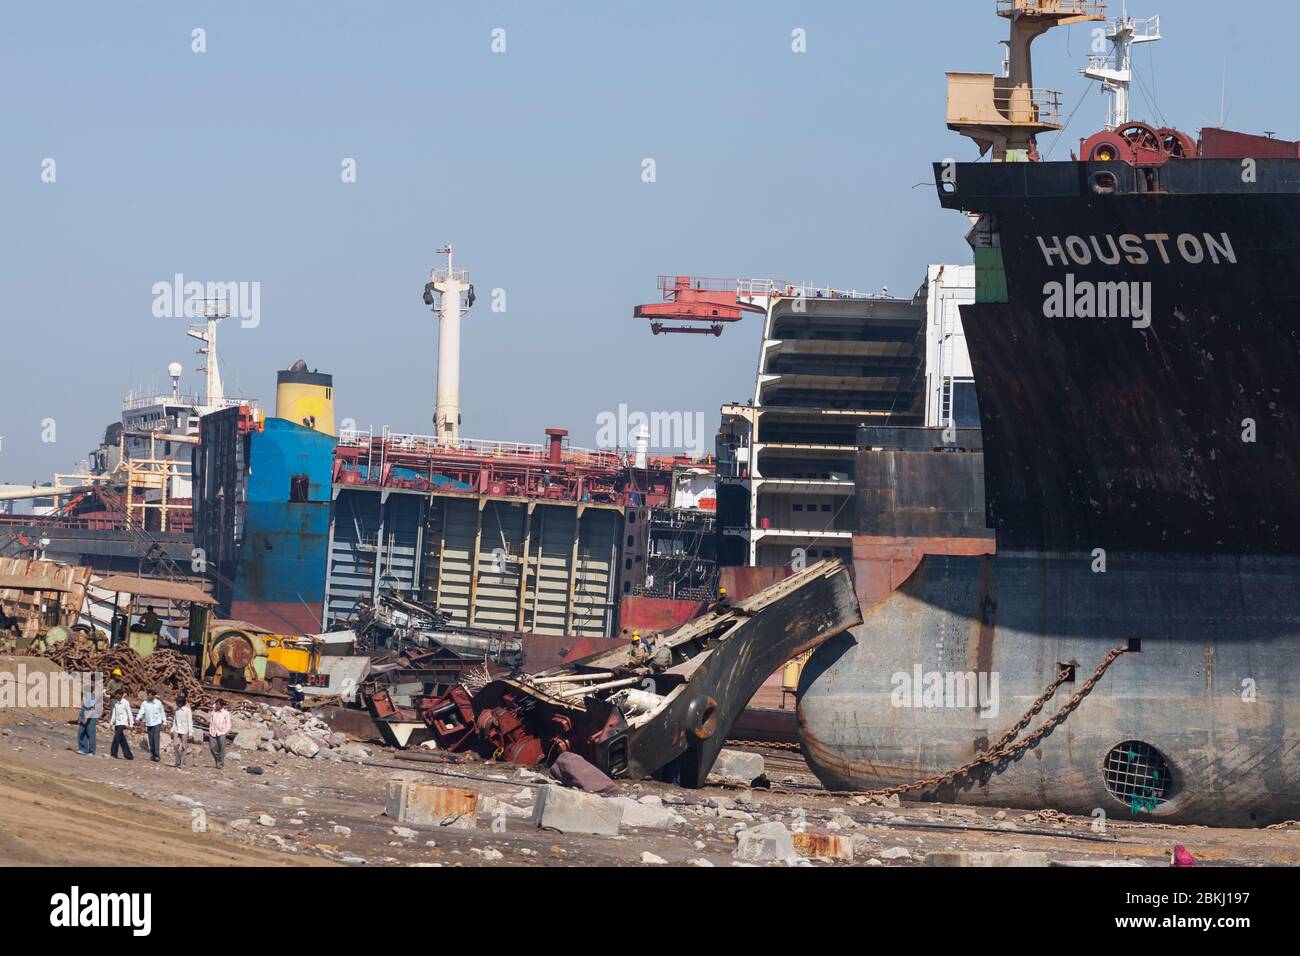 India, Gujarat State, near Bhavnagar, Alang shipyards, beach used to dismantle reformed ships, men at work Stock Photo